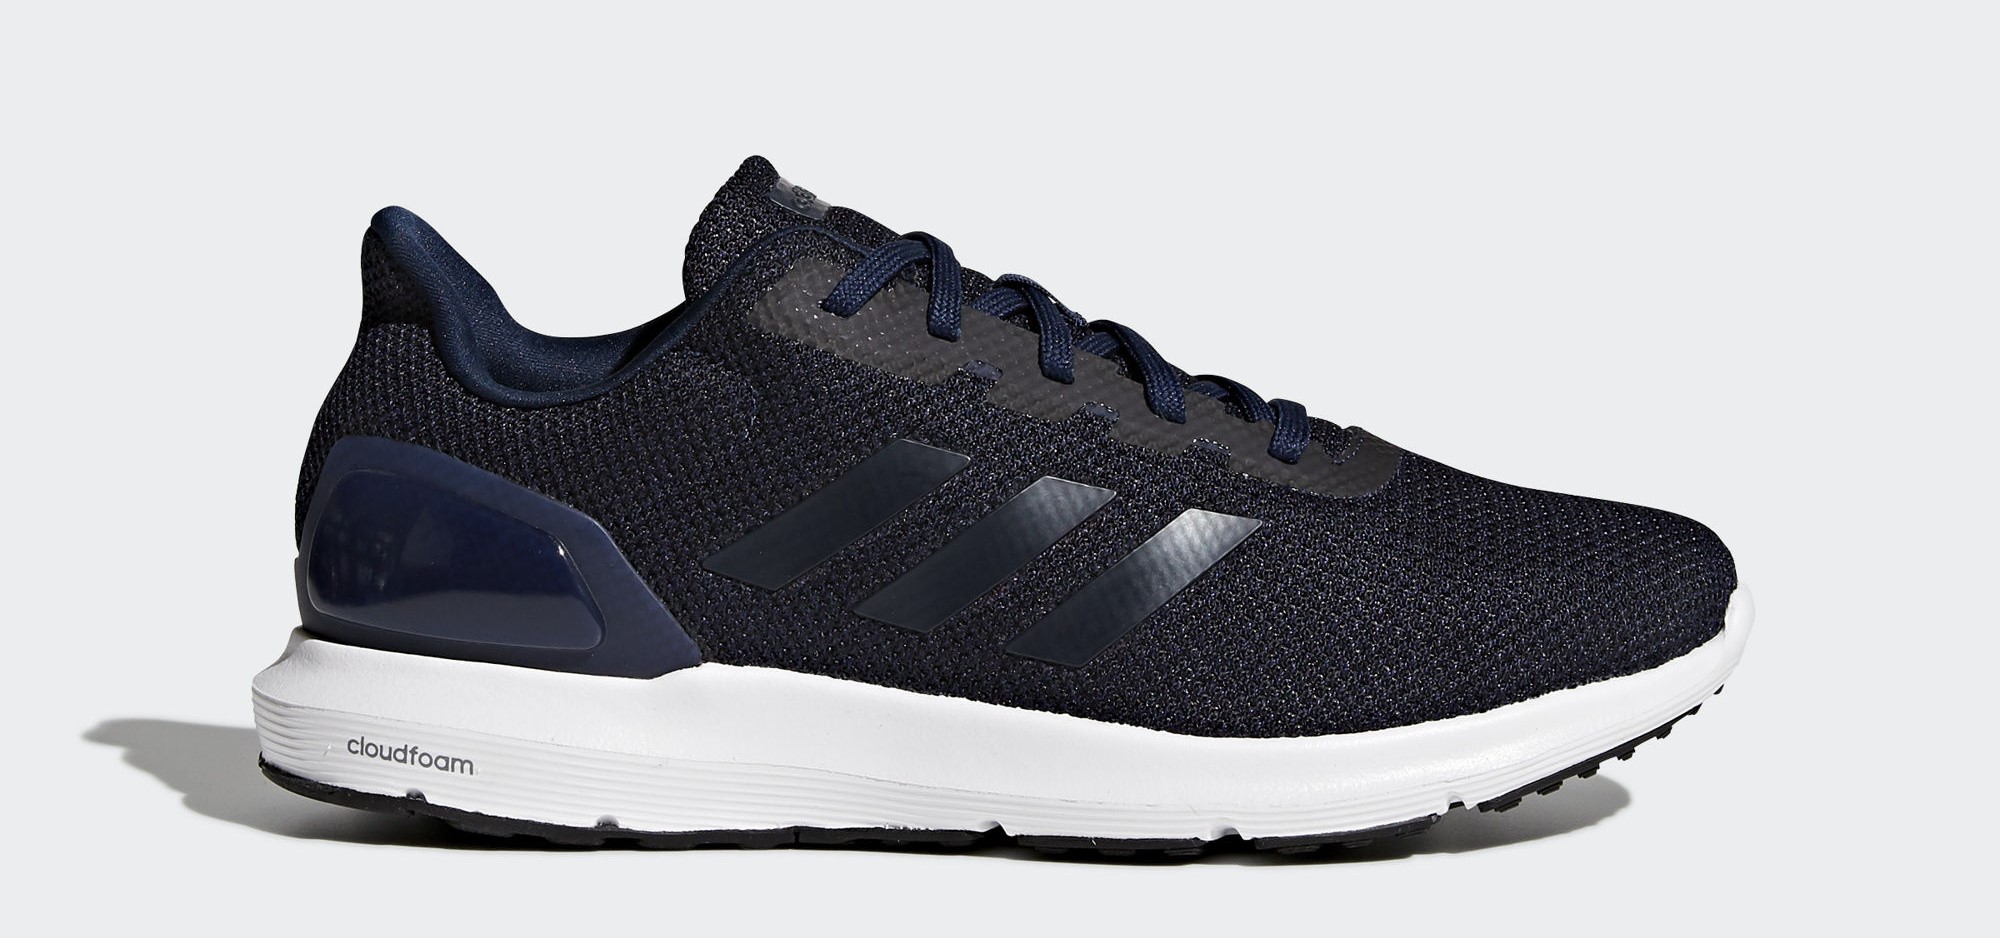 Adidas Cosmic 2 men’s shoes for $35, free shipping